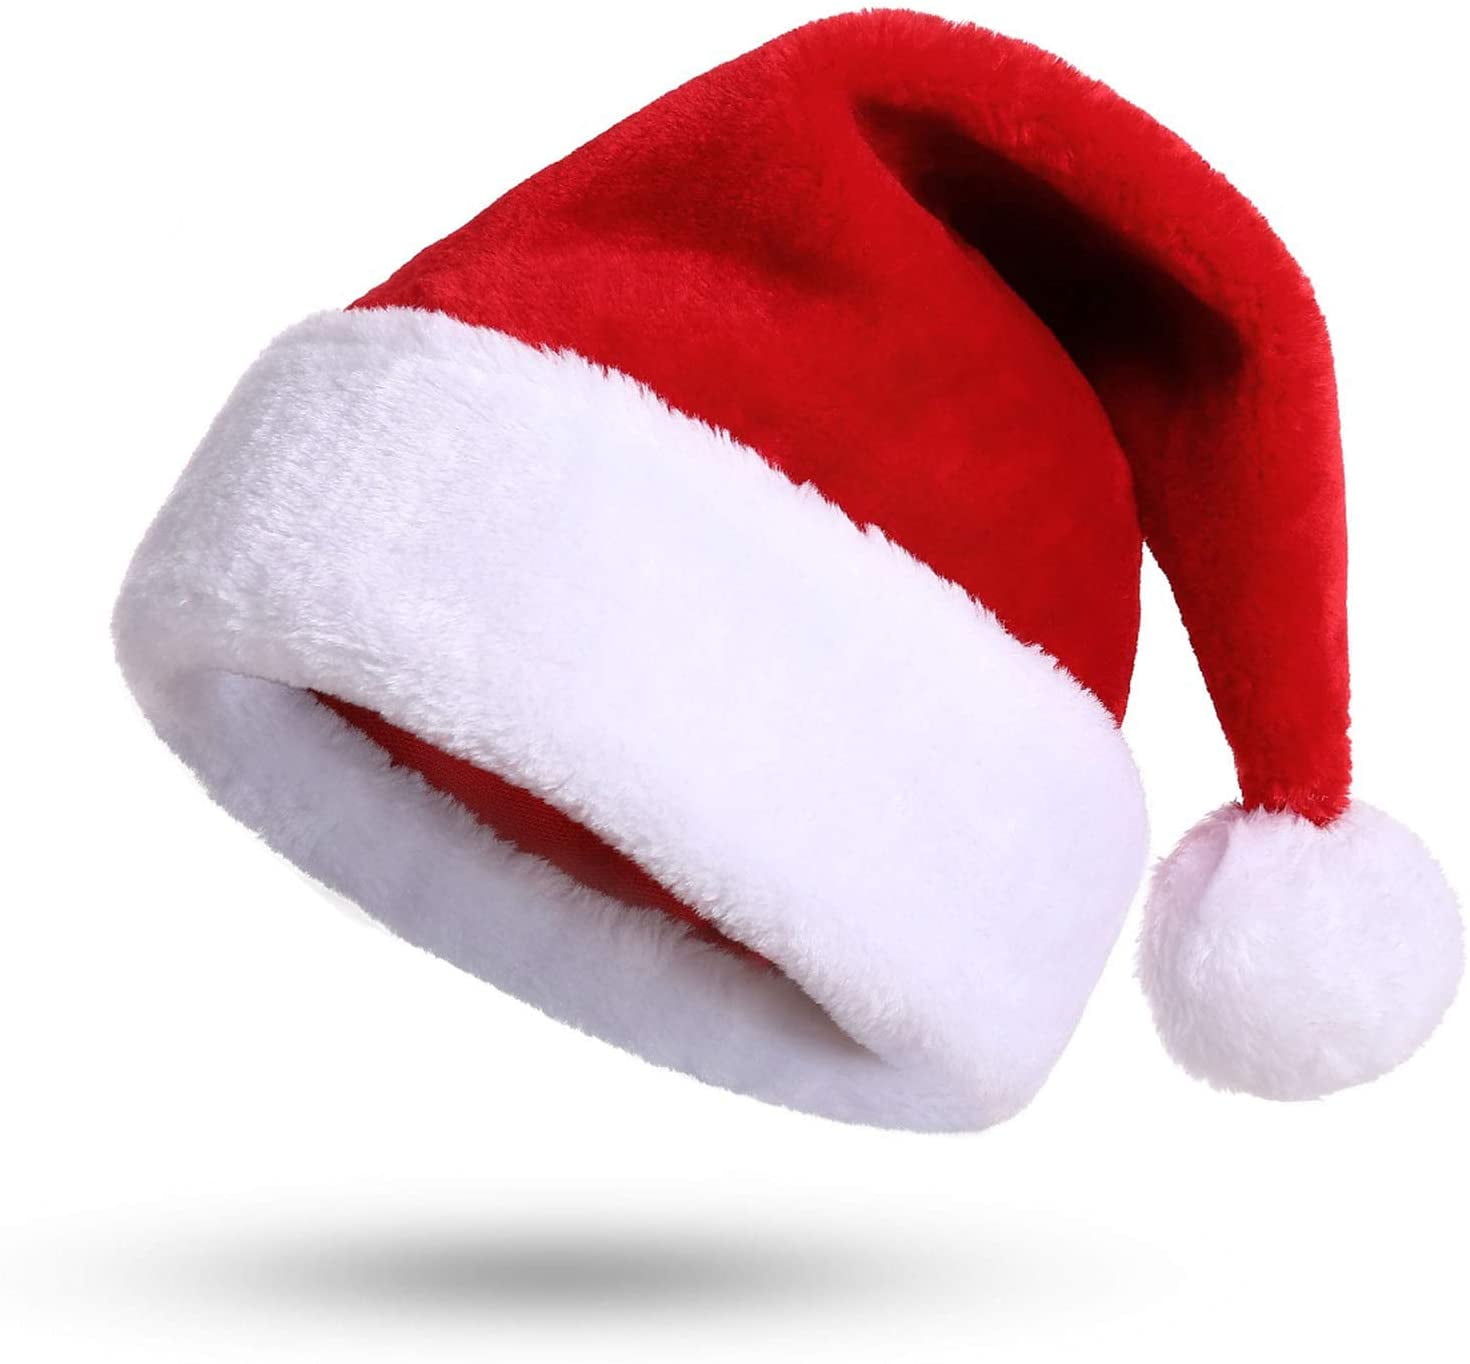 PACK OF 12 FATHER CHRISTMAS RED SANTA HAT XMAS OFFICE PARTY ACCESSORY HATS 